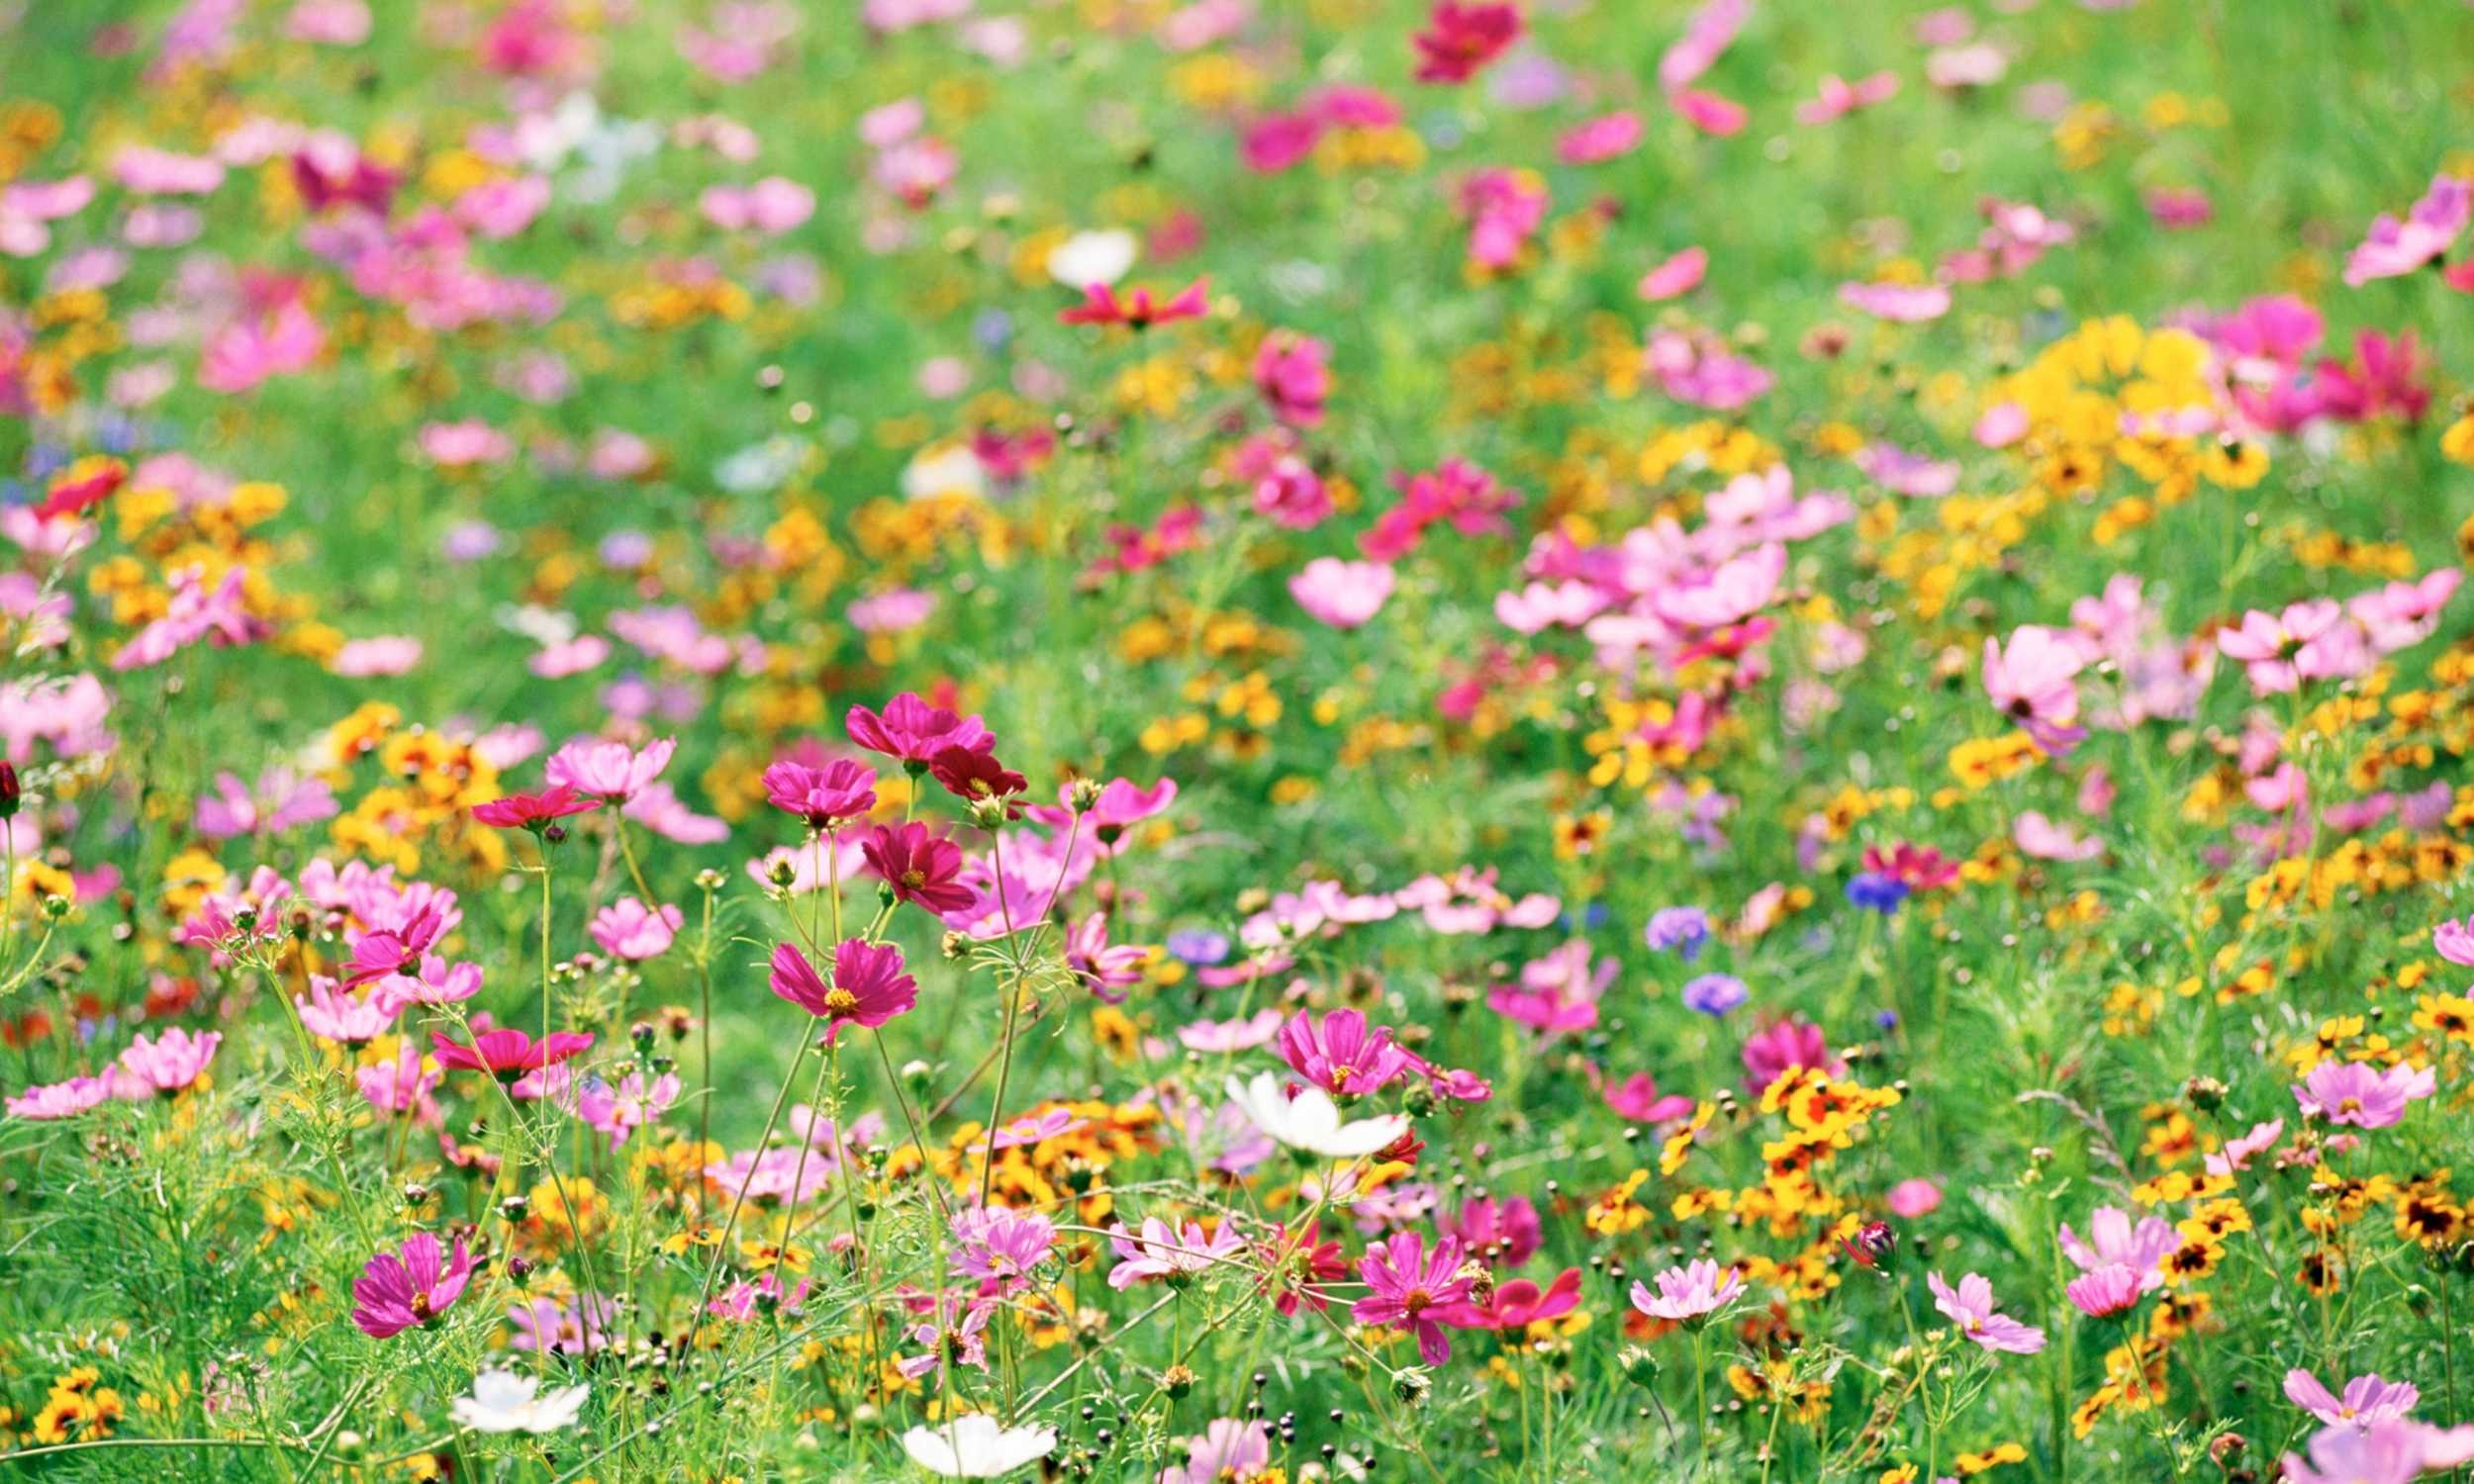 How to Plant a Wildflower Garden